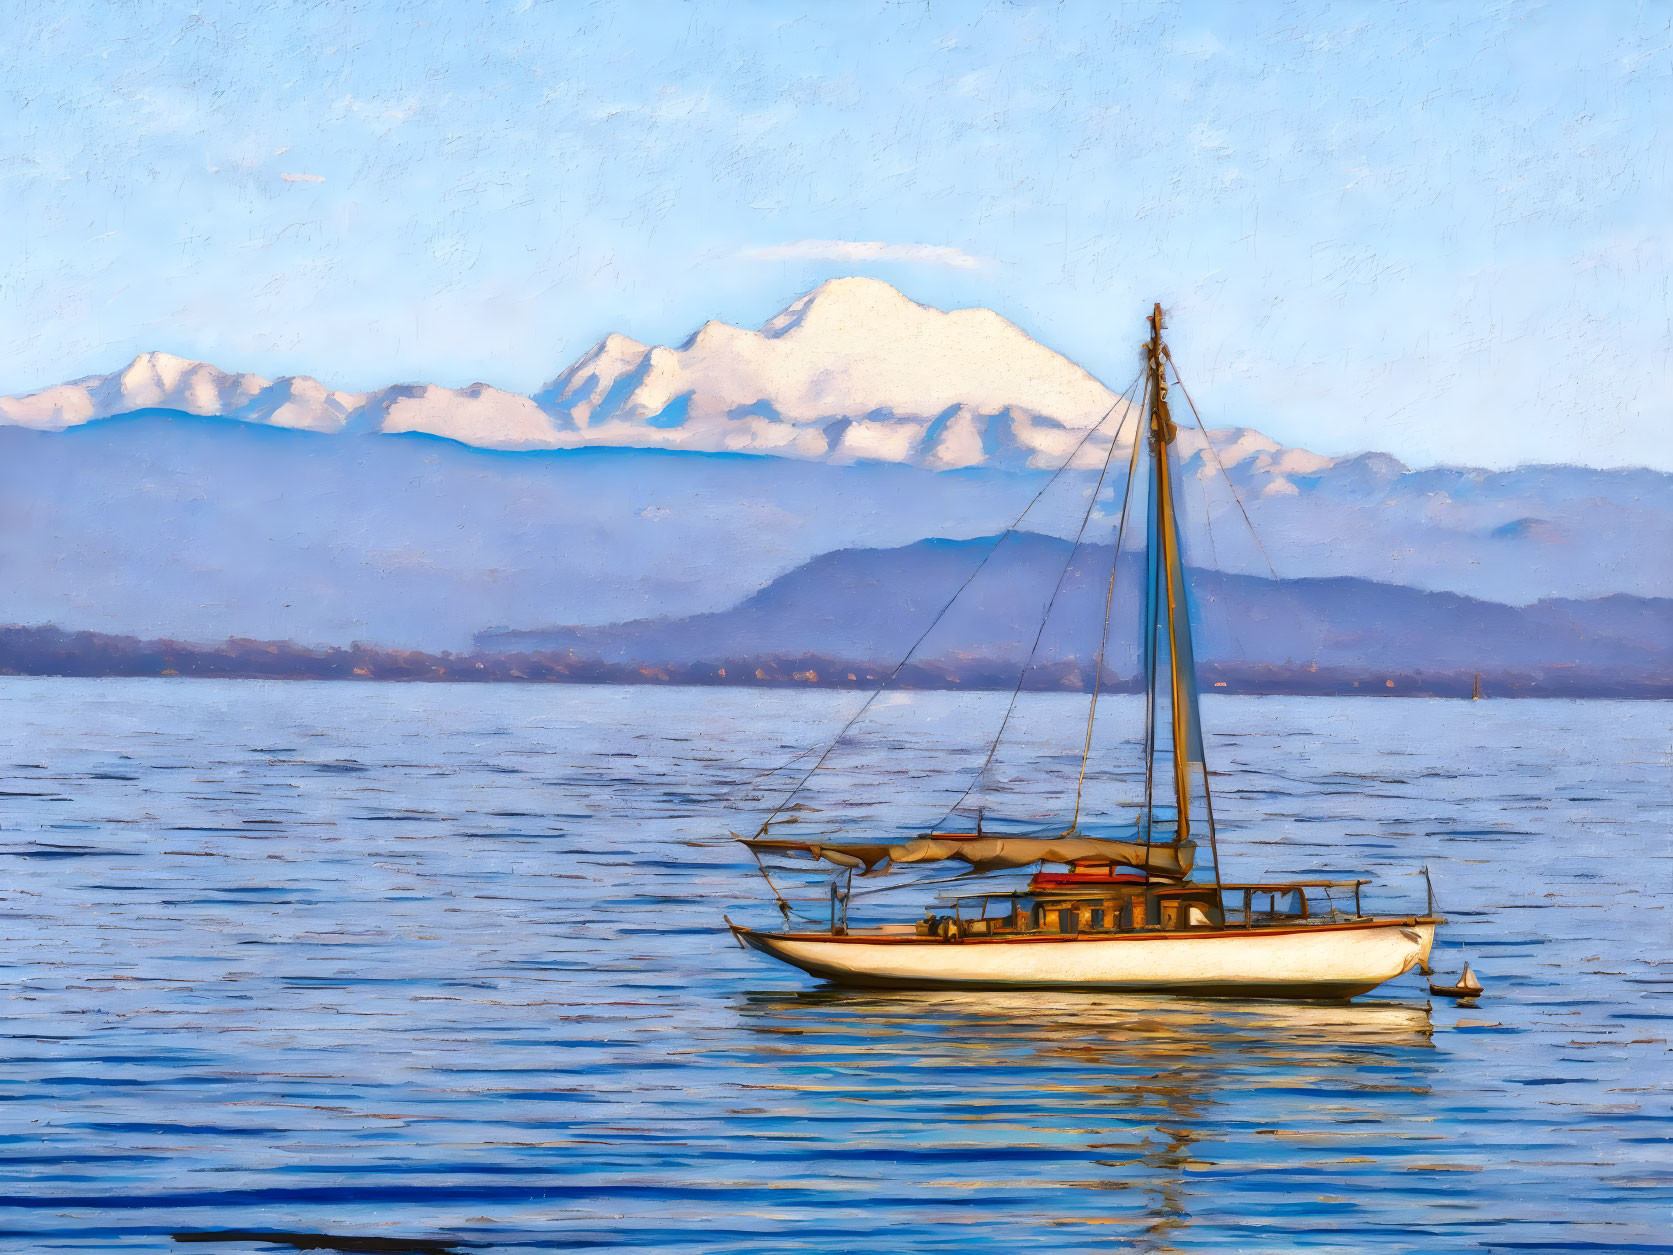 Sailboat on calm blue waters with snow-capped mountains and clear sky